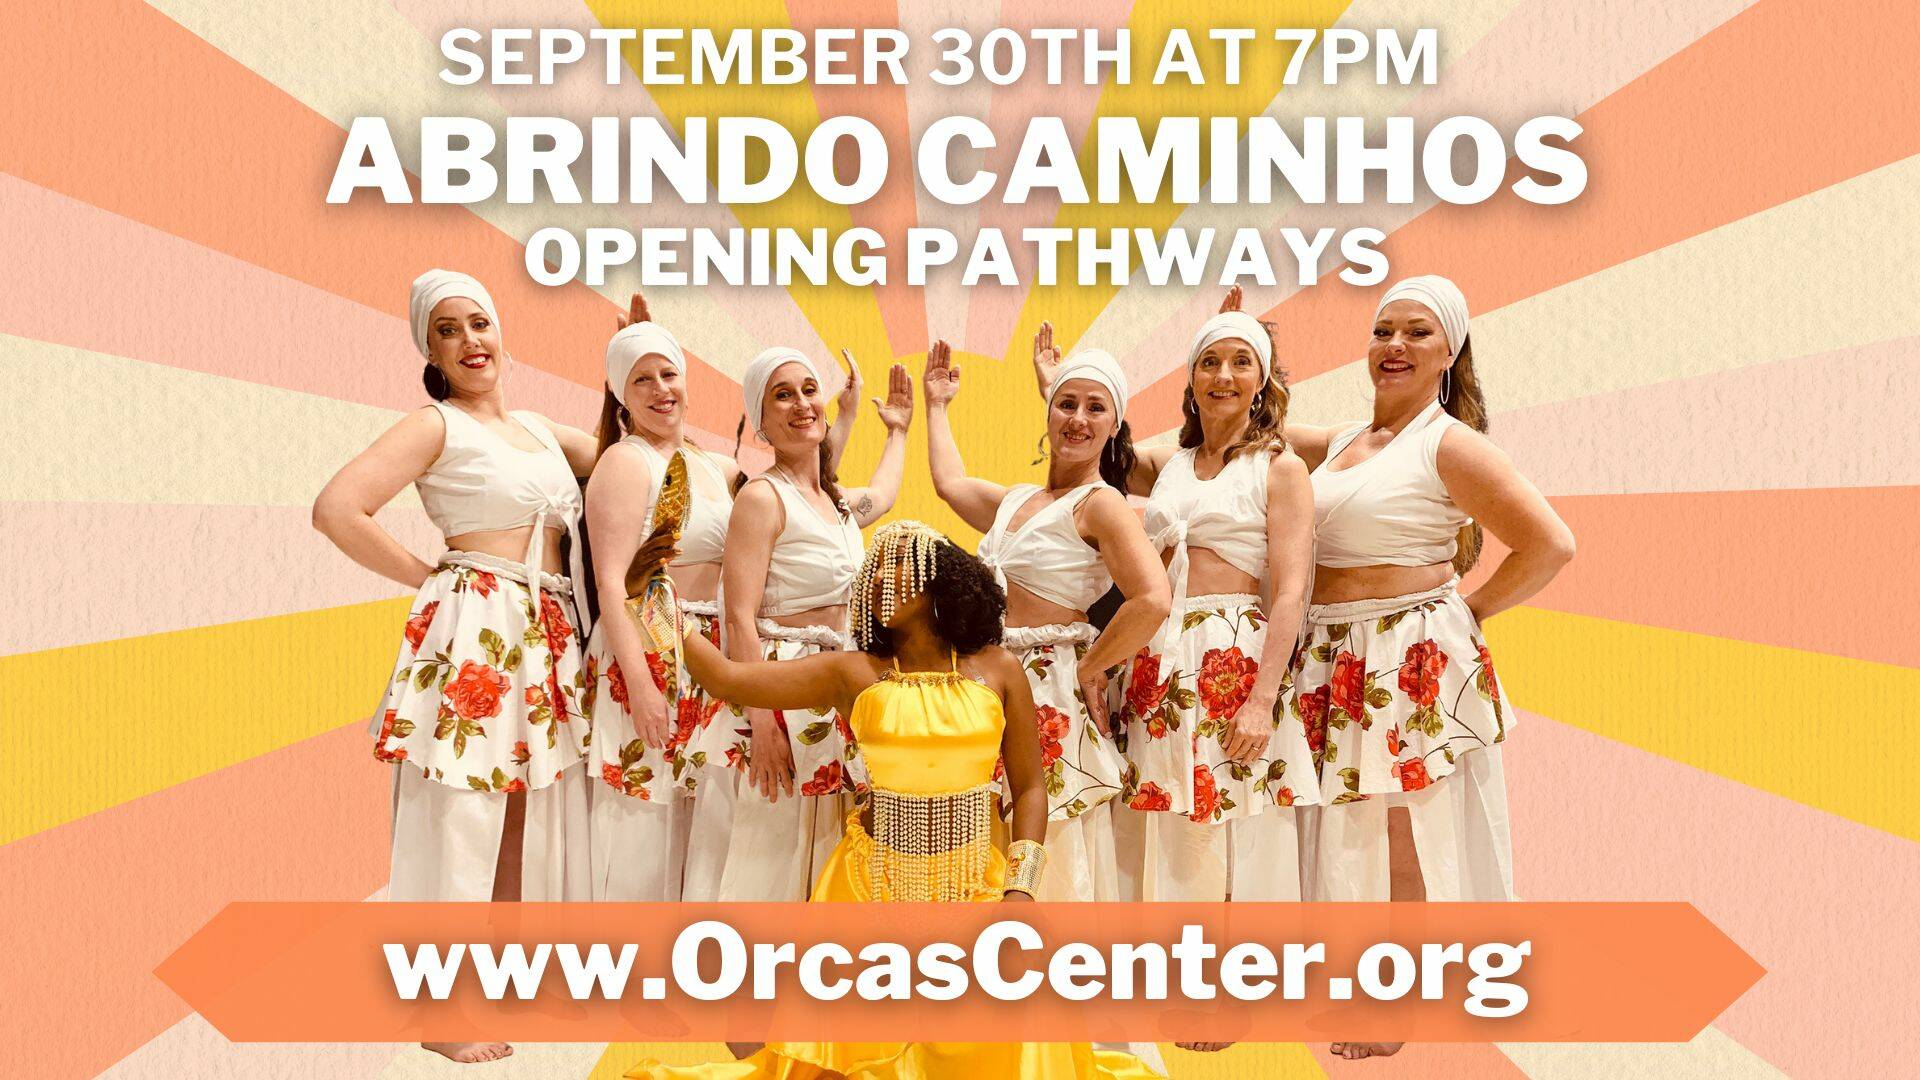 Bahia in Motion presents “Abrindo Caminhos” (Opening Pathways) at Orcas Center.